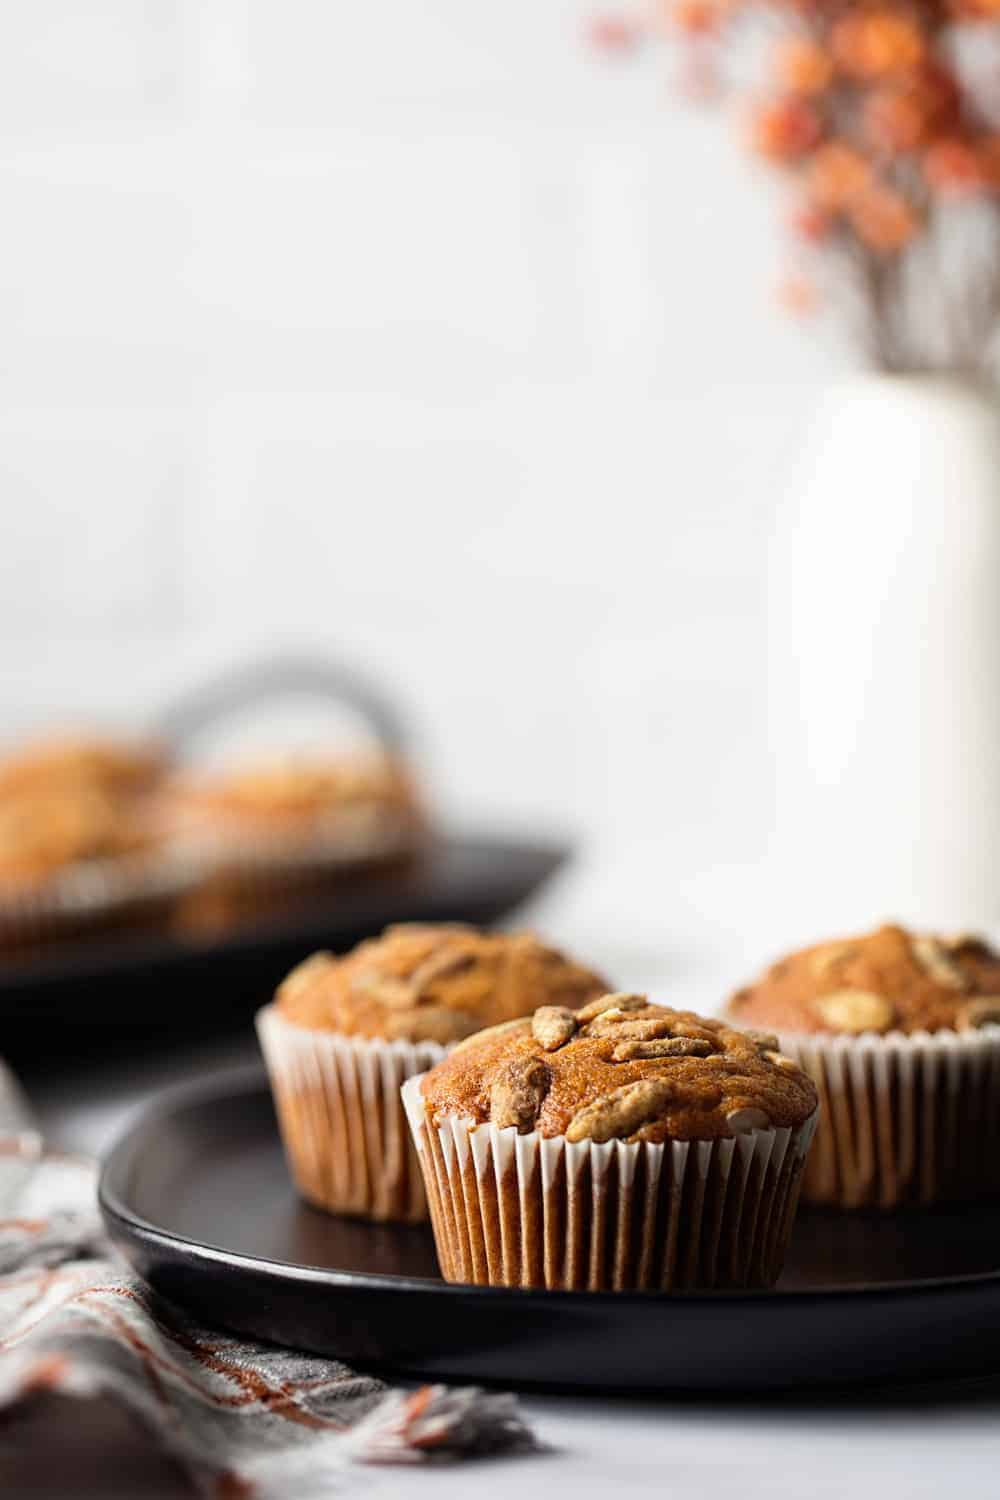 Pumpkin Muffins are loaded with fall spices and full of delicious pumpkin flavor.